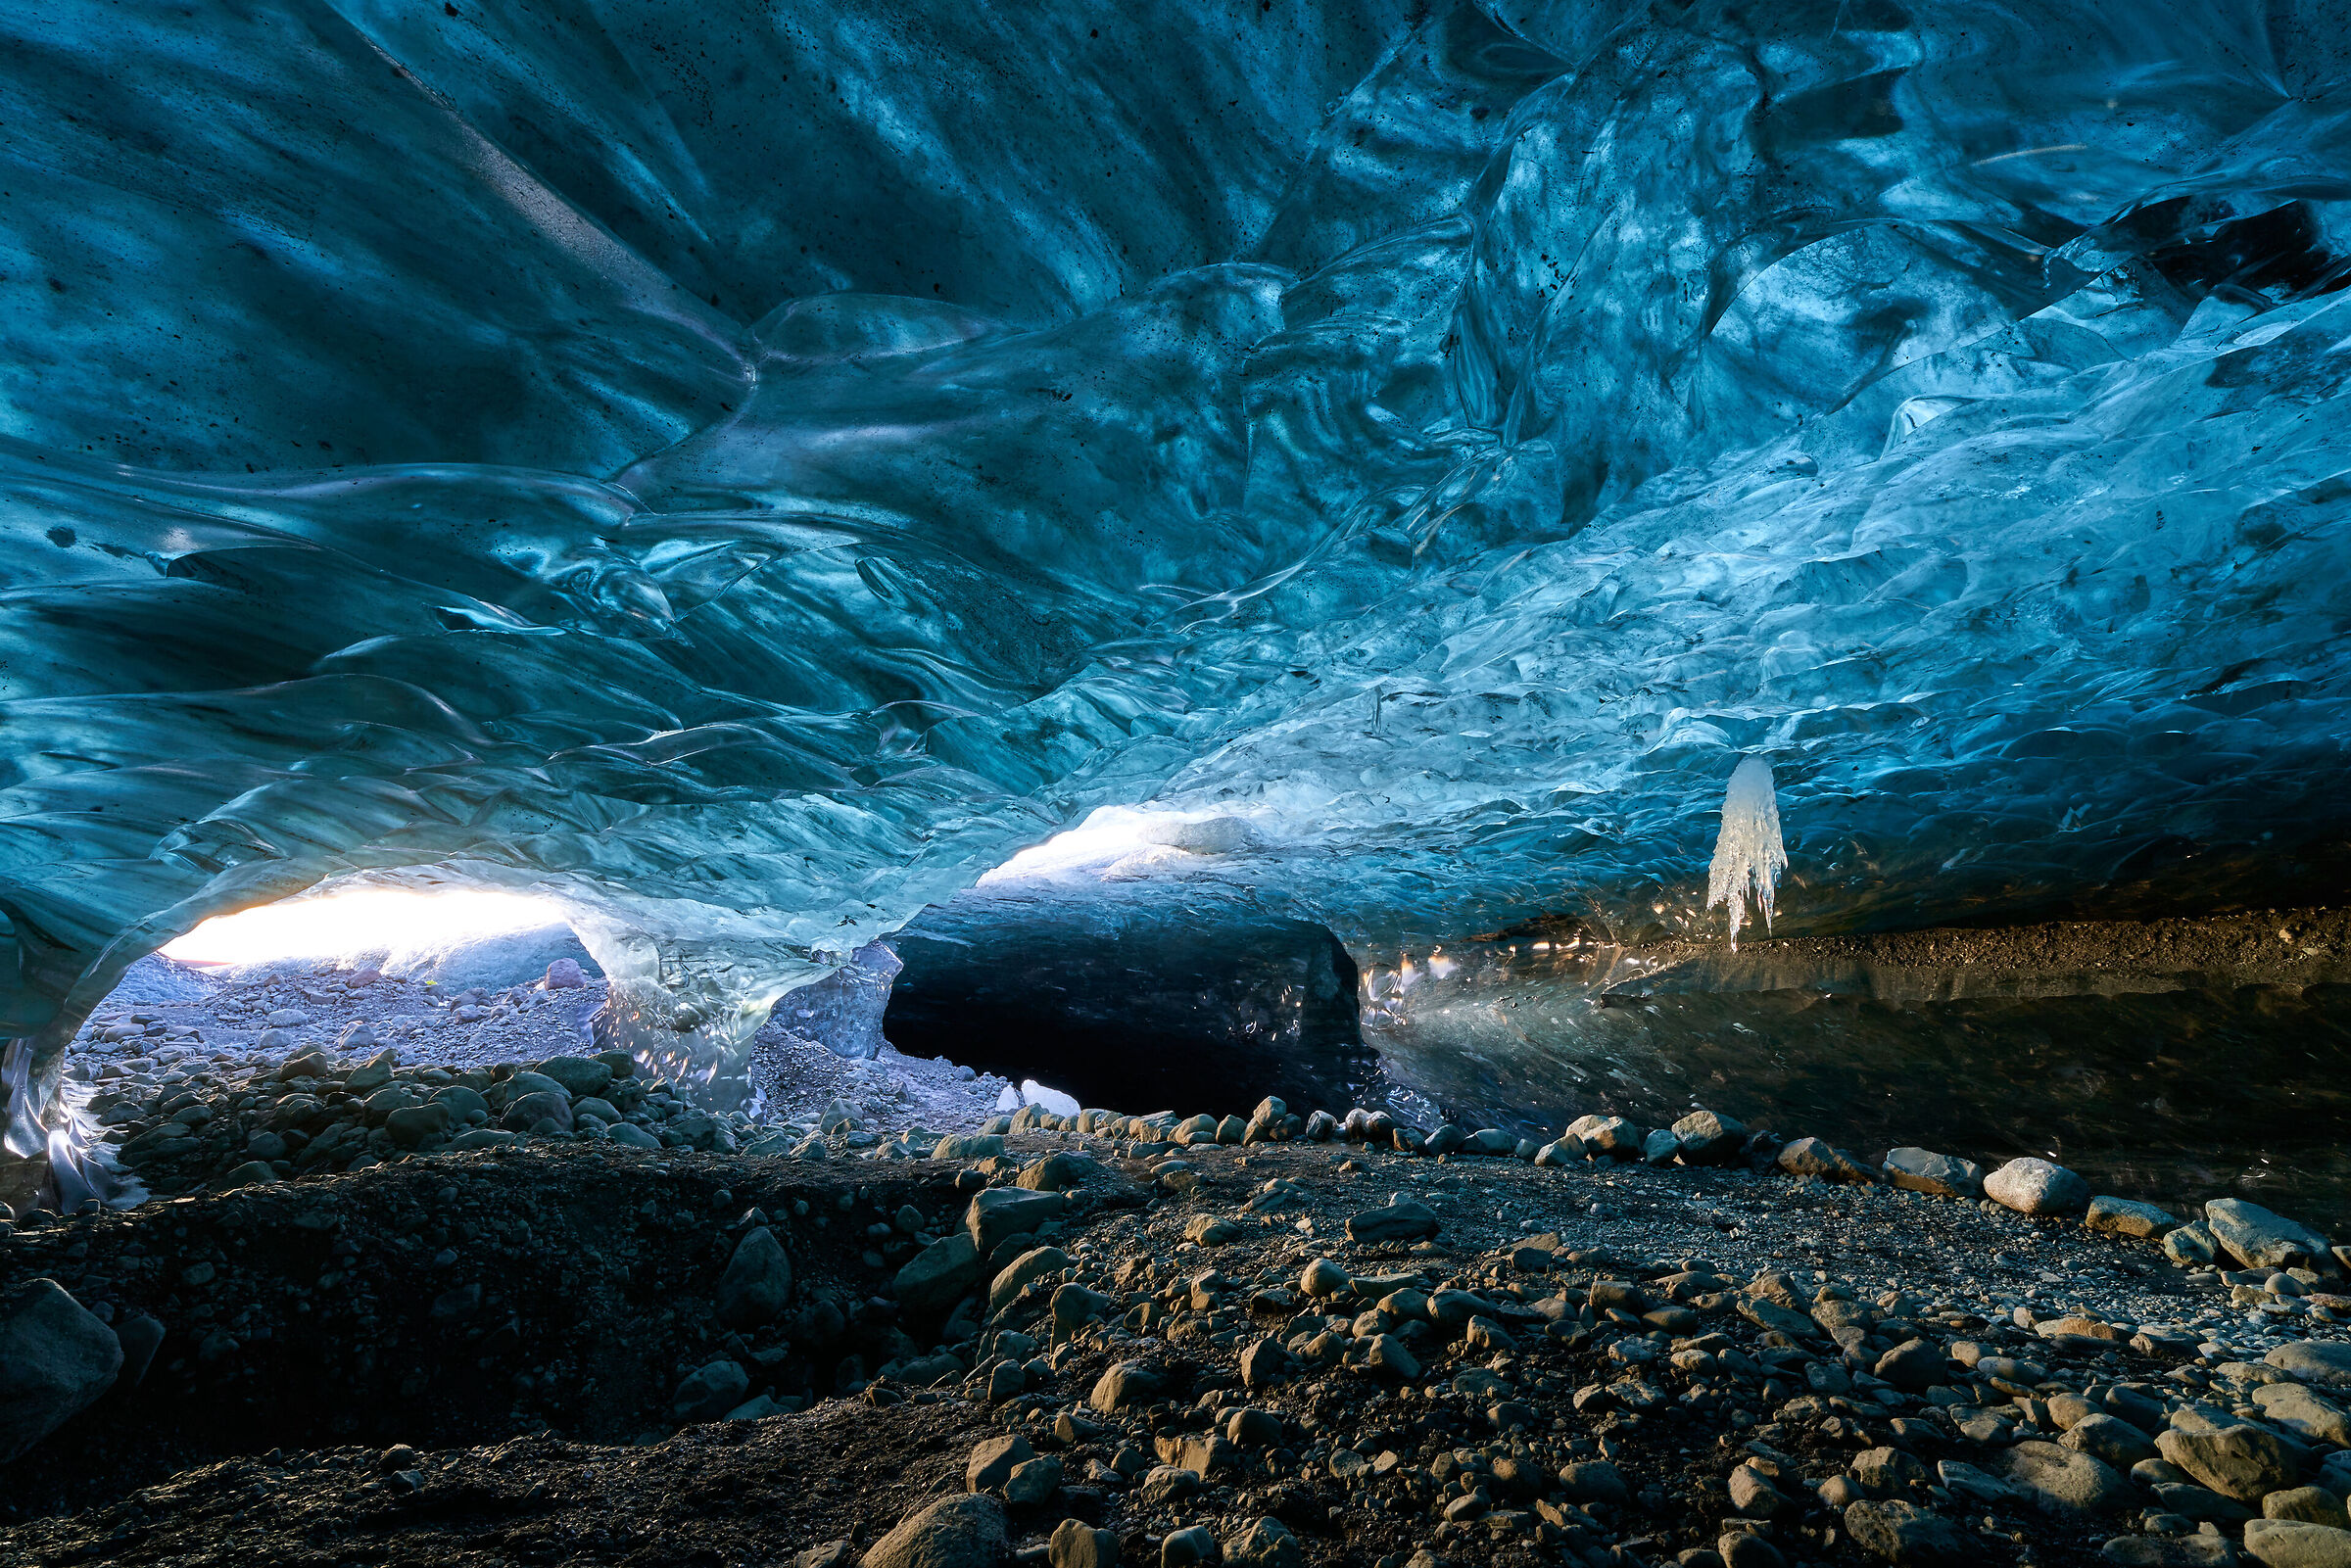 The ice cave...